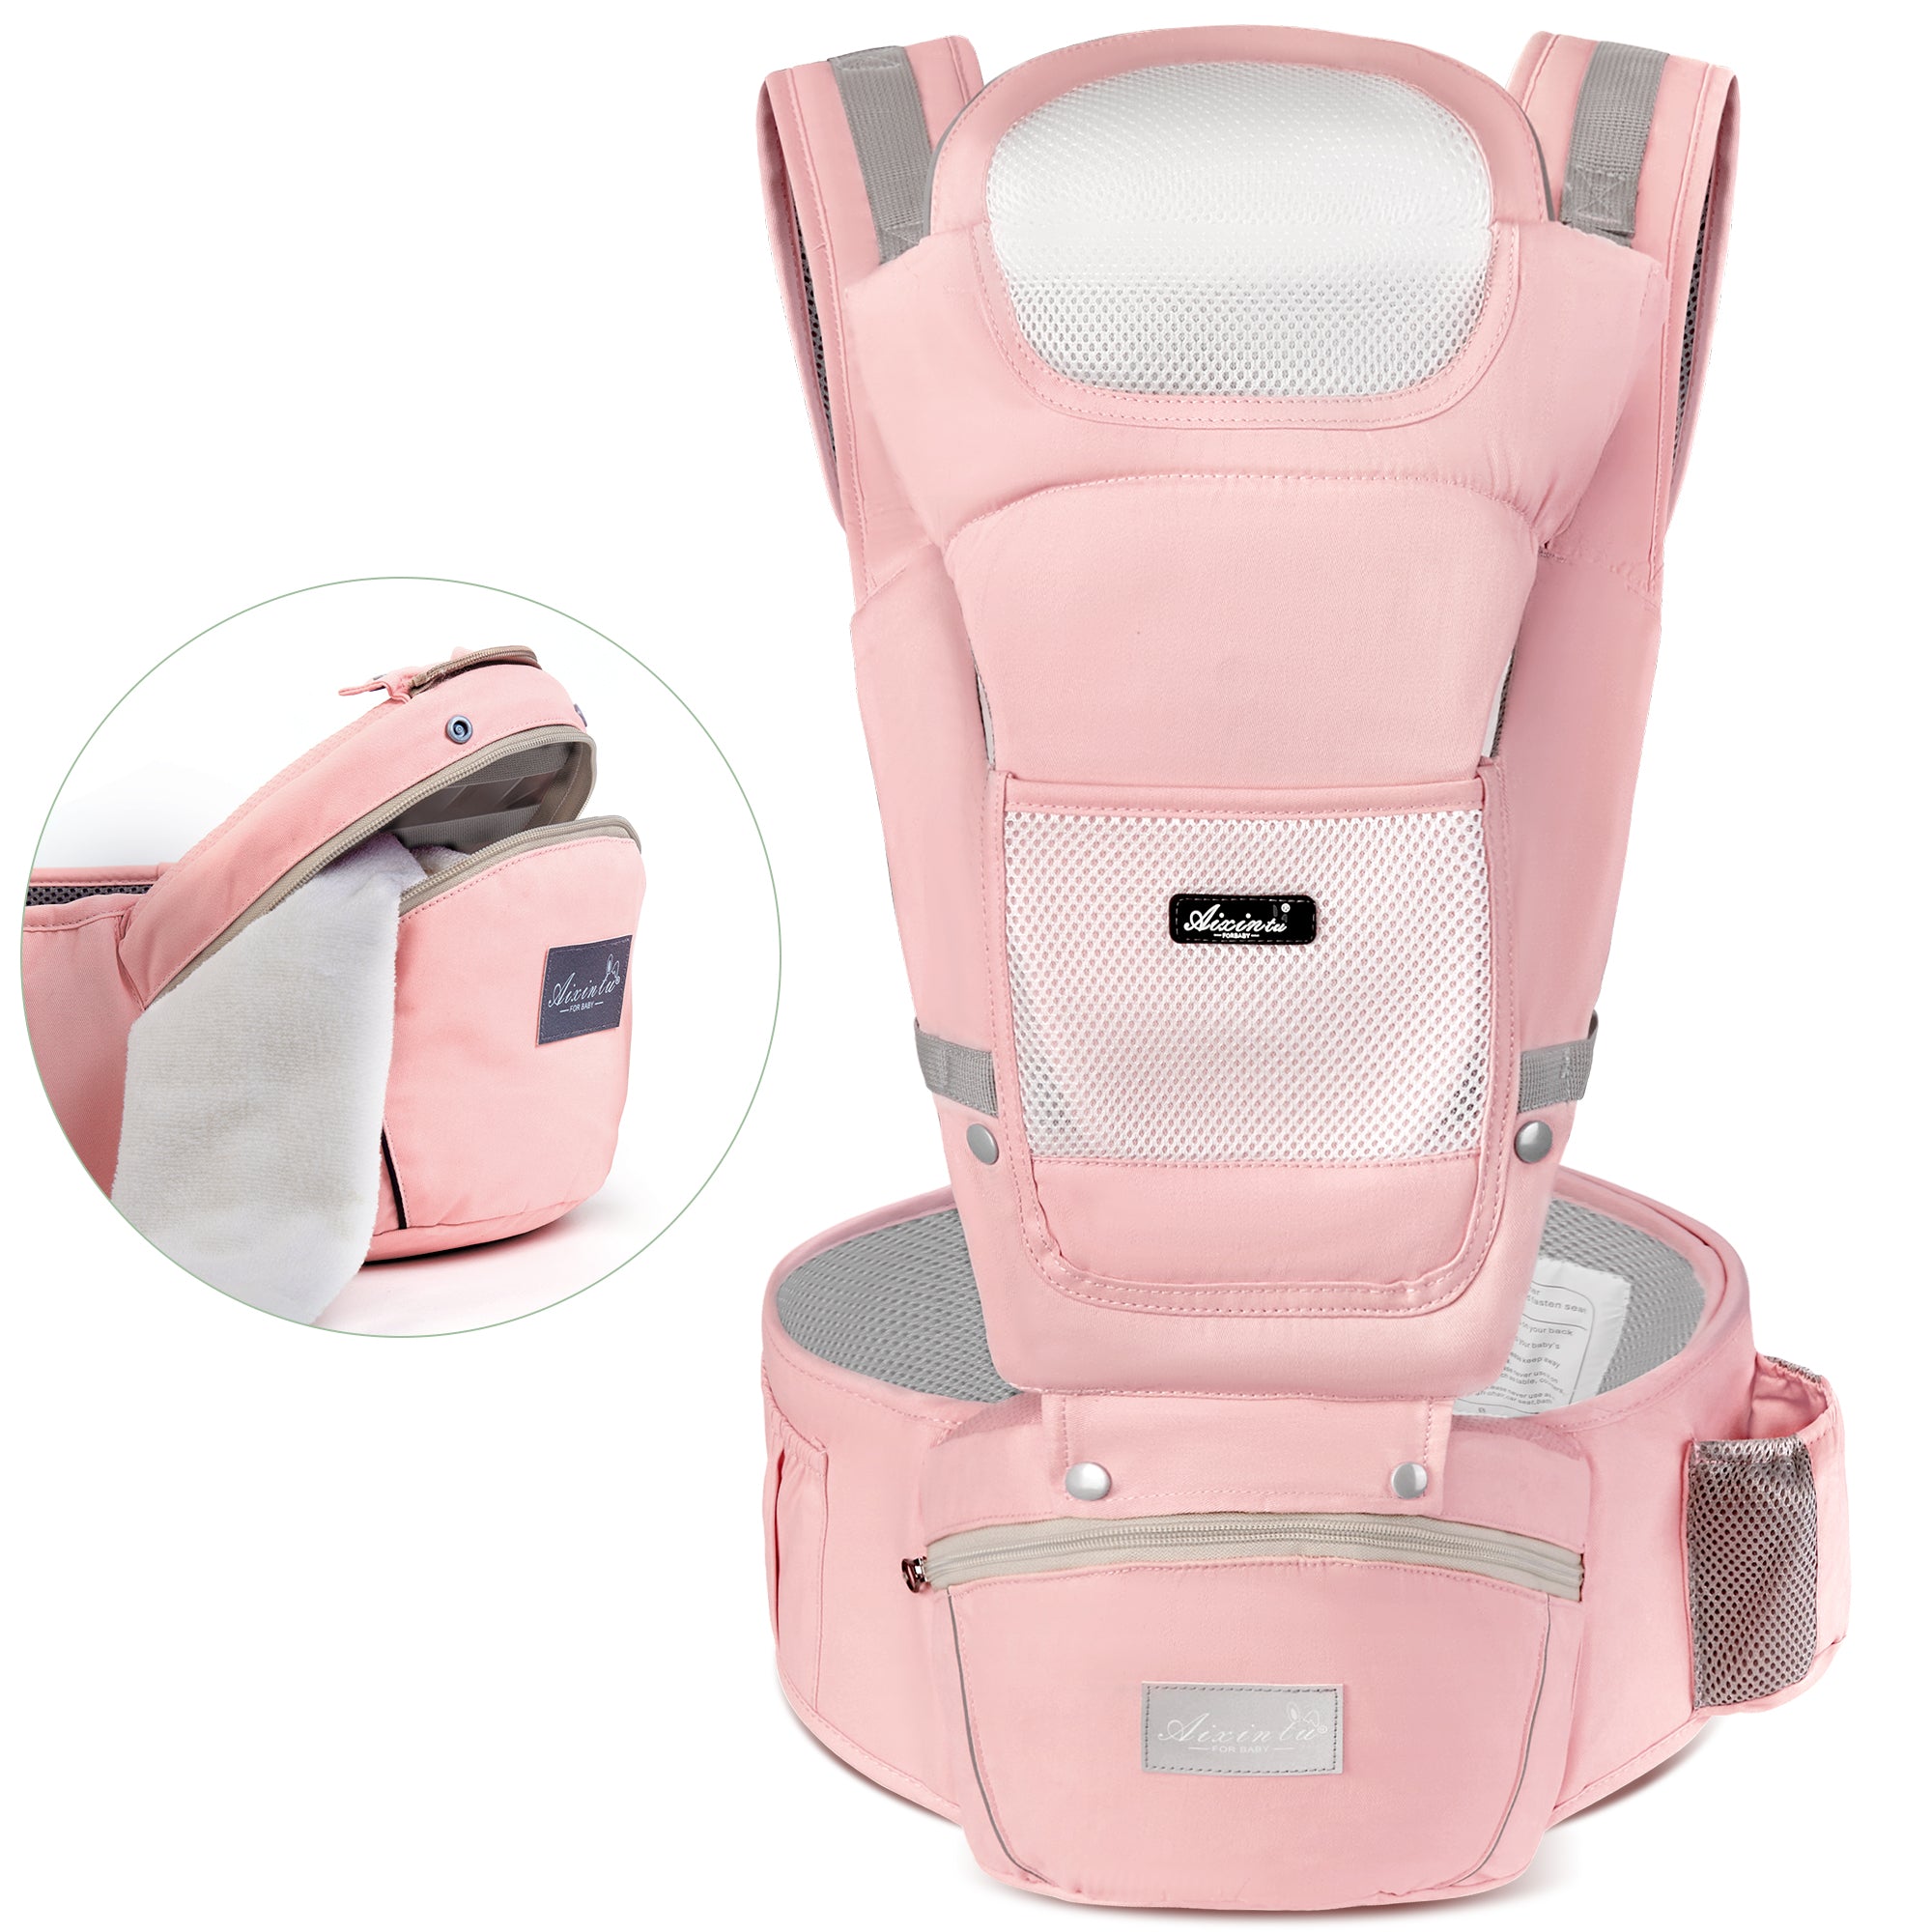 Baby Carrier Waist Stool Detachable Newborn Walkers Cotton Mesh Backpack for All Seasons, Pink